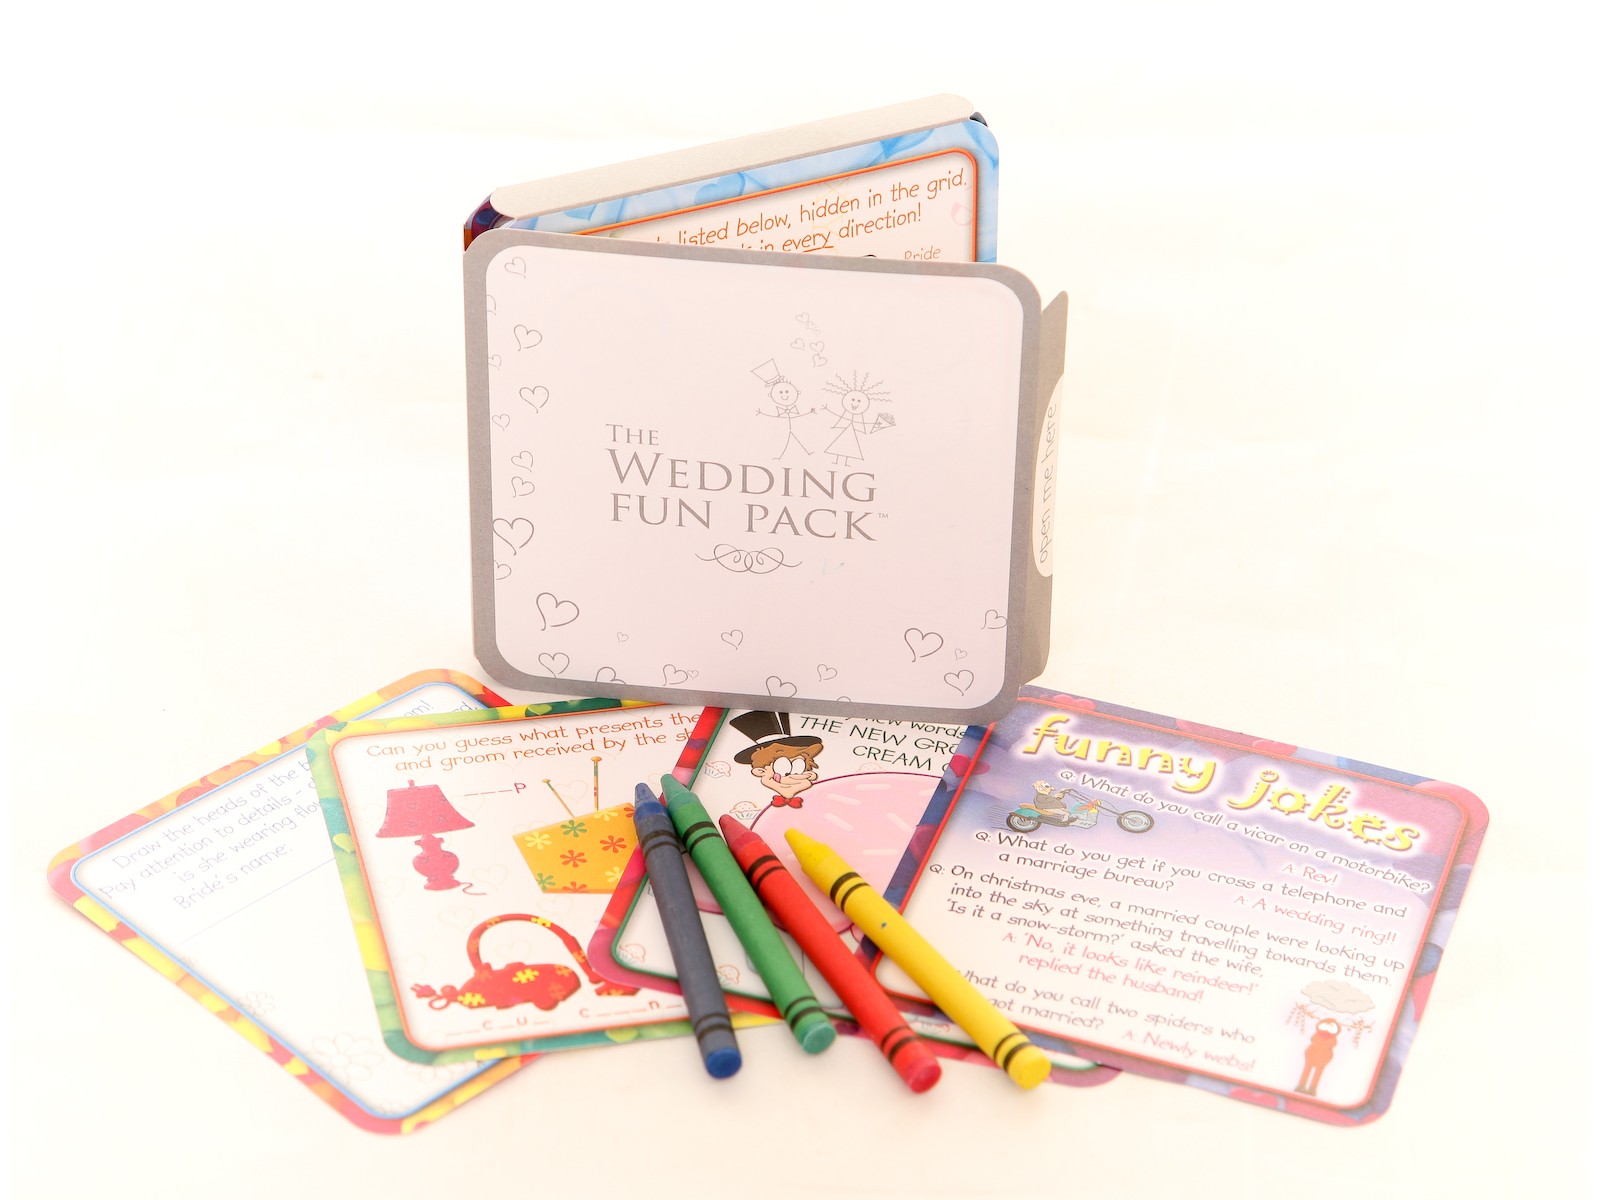 Wedding fun pack and contents